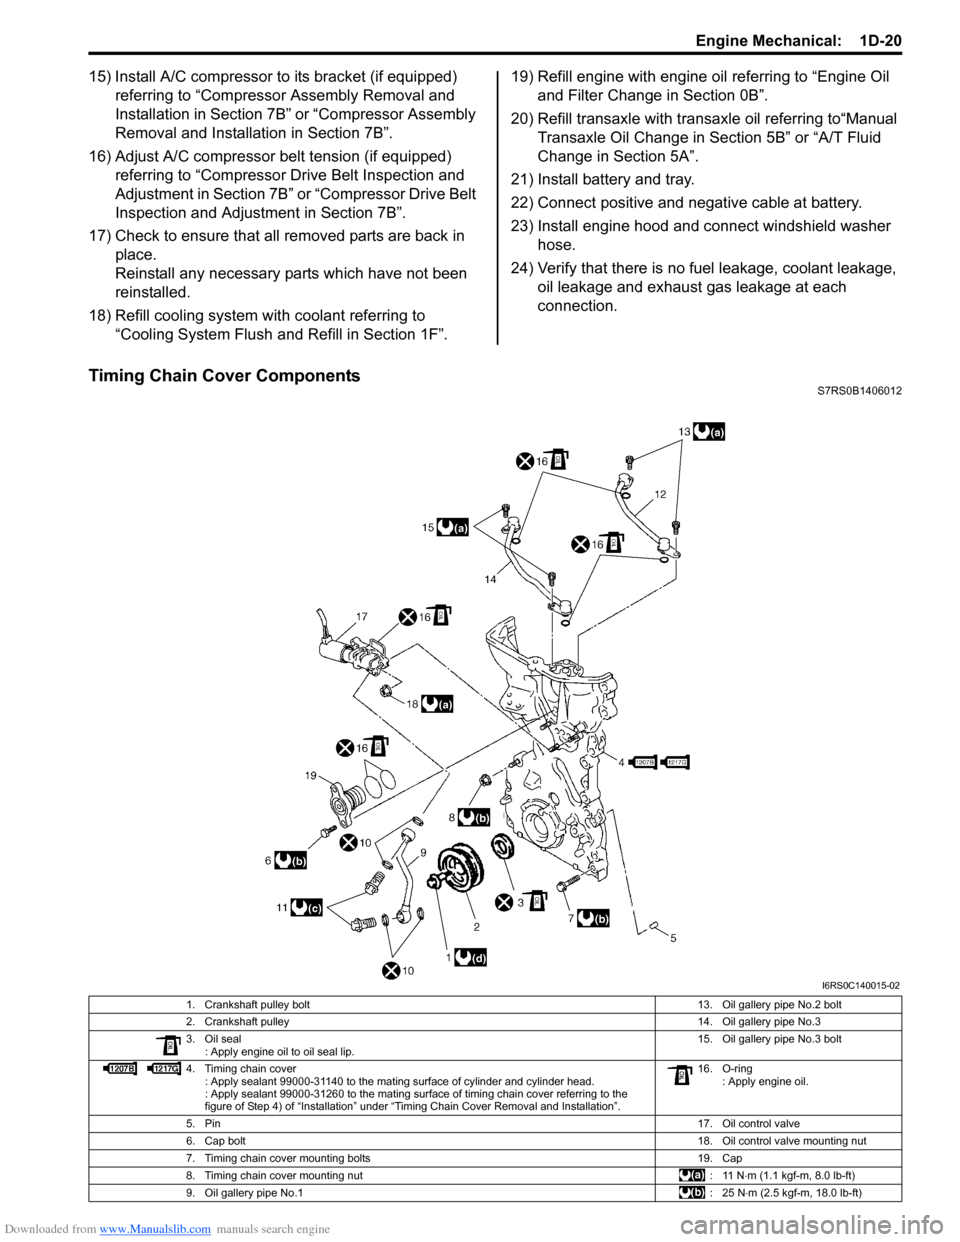 SUZUKI SWIFT 2006 2.G Service Workshop Manual Downloaded from www.Manualslib.com manuals search engine Engine Mechanical:  1D-20
15) Install A/C compressor to its bracket (if equipped) referring to “Compressor Assembly Removal and 
Installation